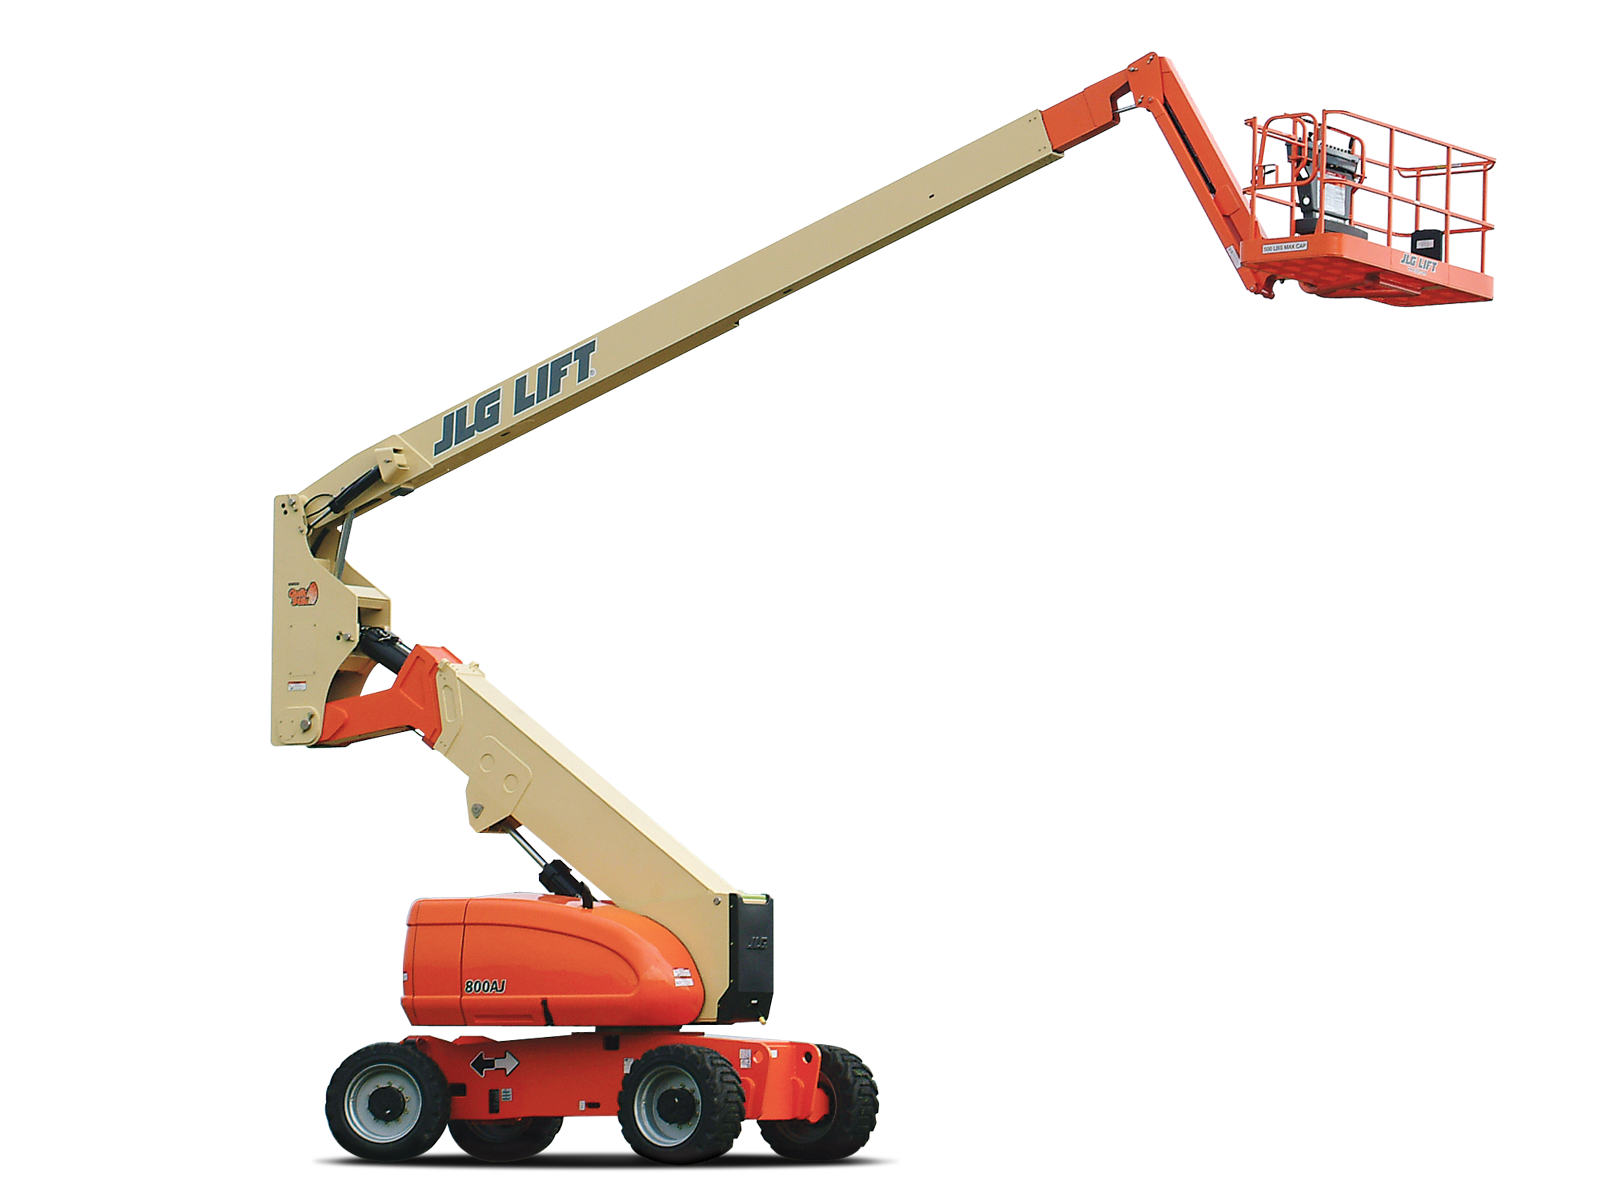 https://cdn-jlg.scdn5.secure.raxcdn.com/-/media/jlg/current-materials-no-password/products/asia/engine-powered-boom-lifts/articulating-booms/800-series/800aj/images/800aj-gallery-silo.png?rev=0e1348afff8343b2a9dbe3c46419865f